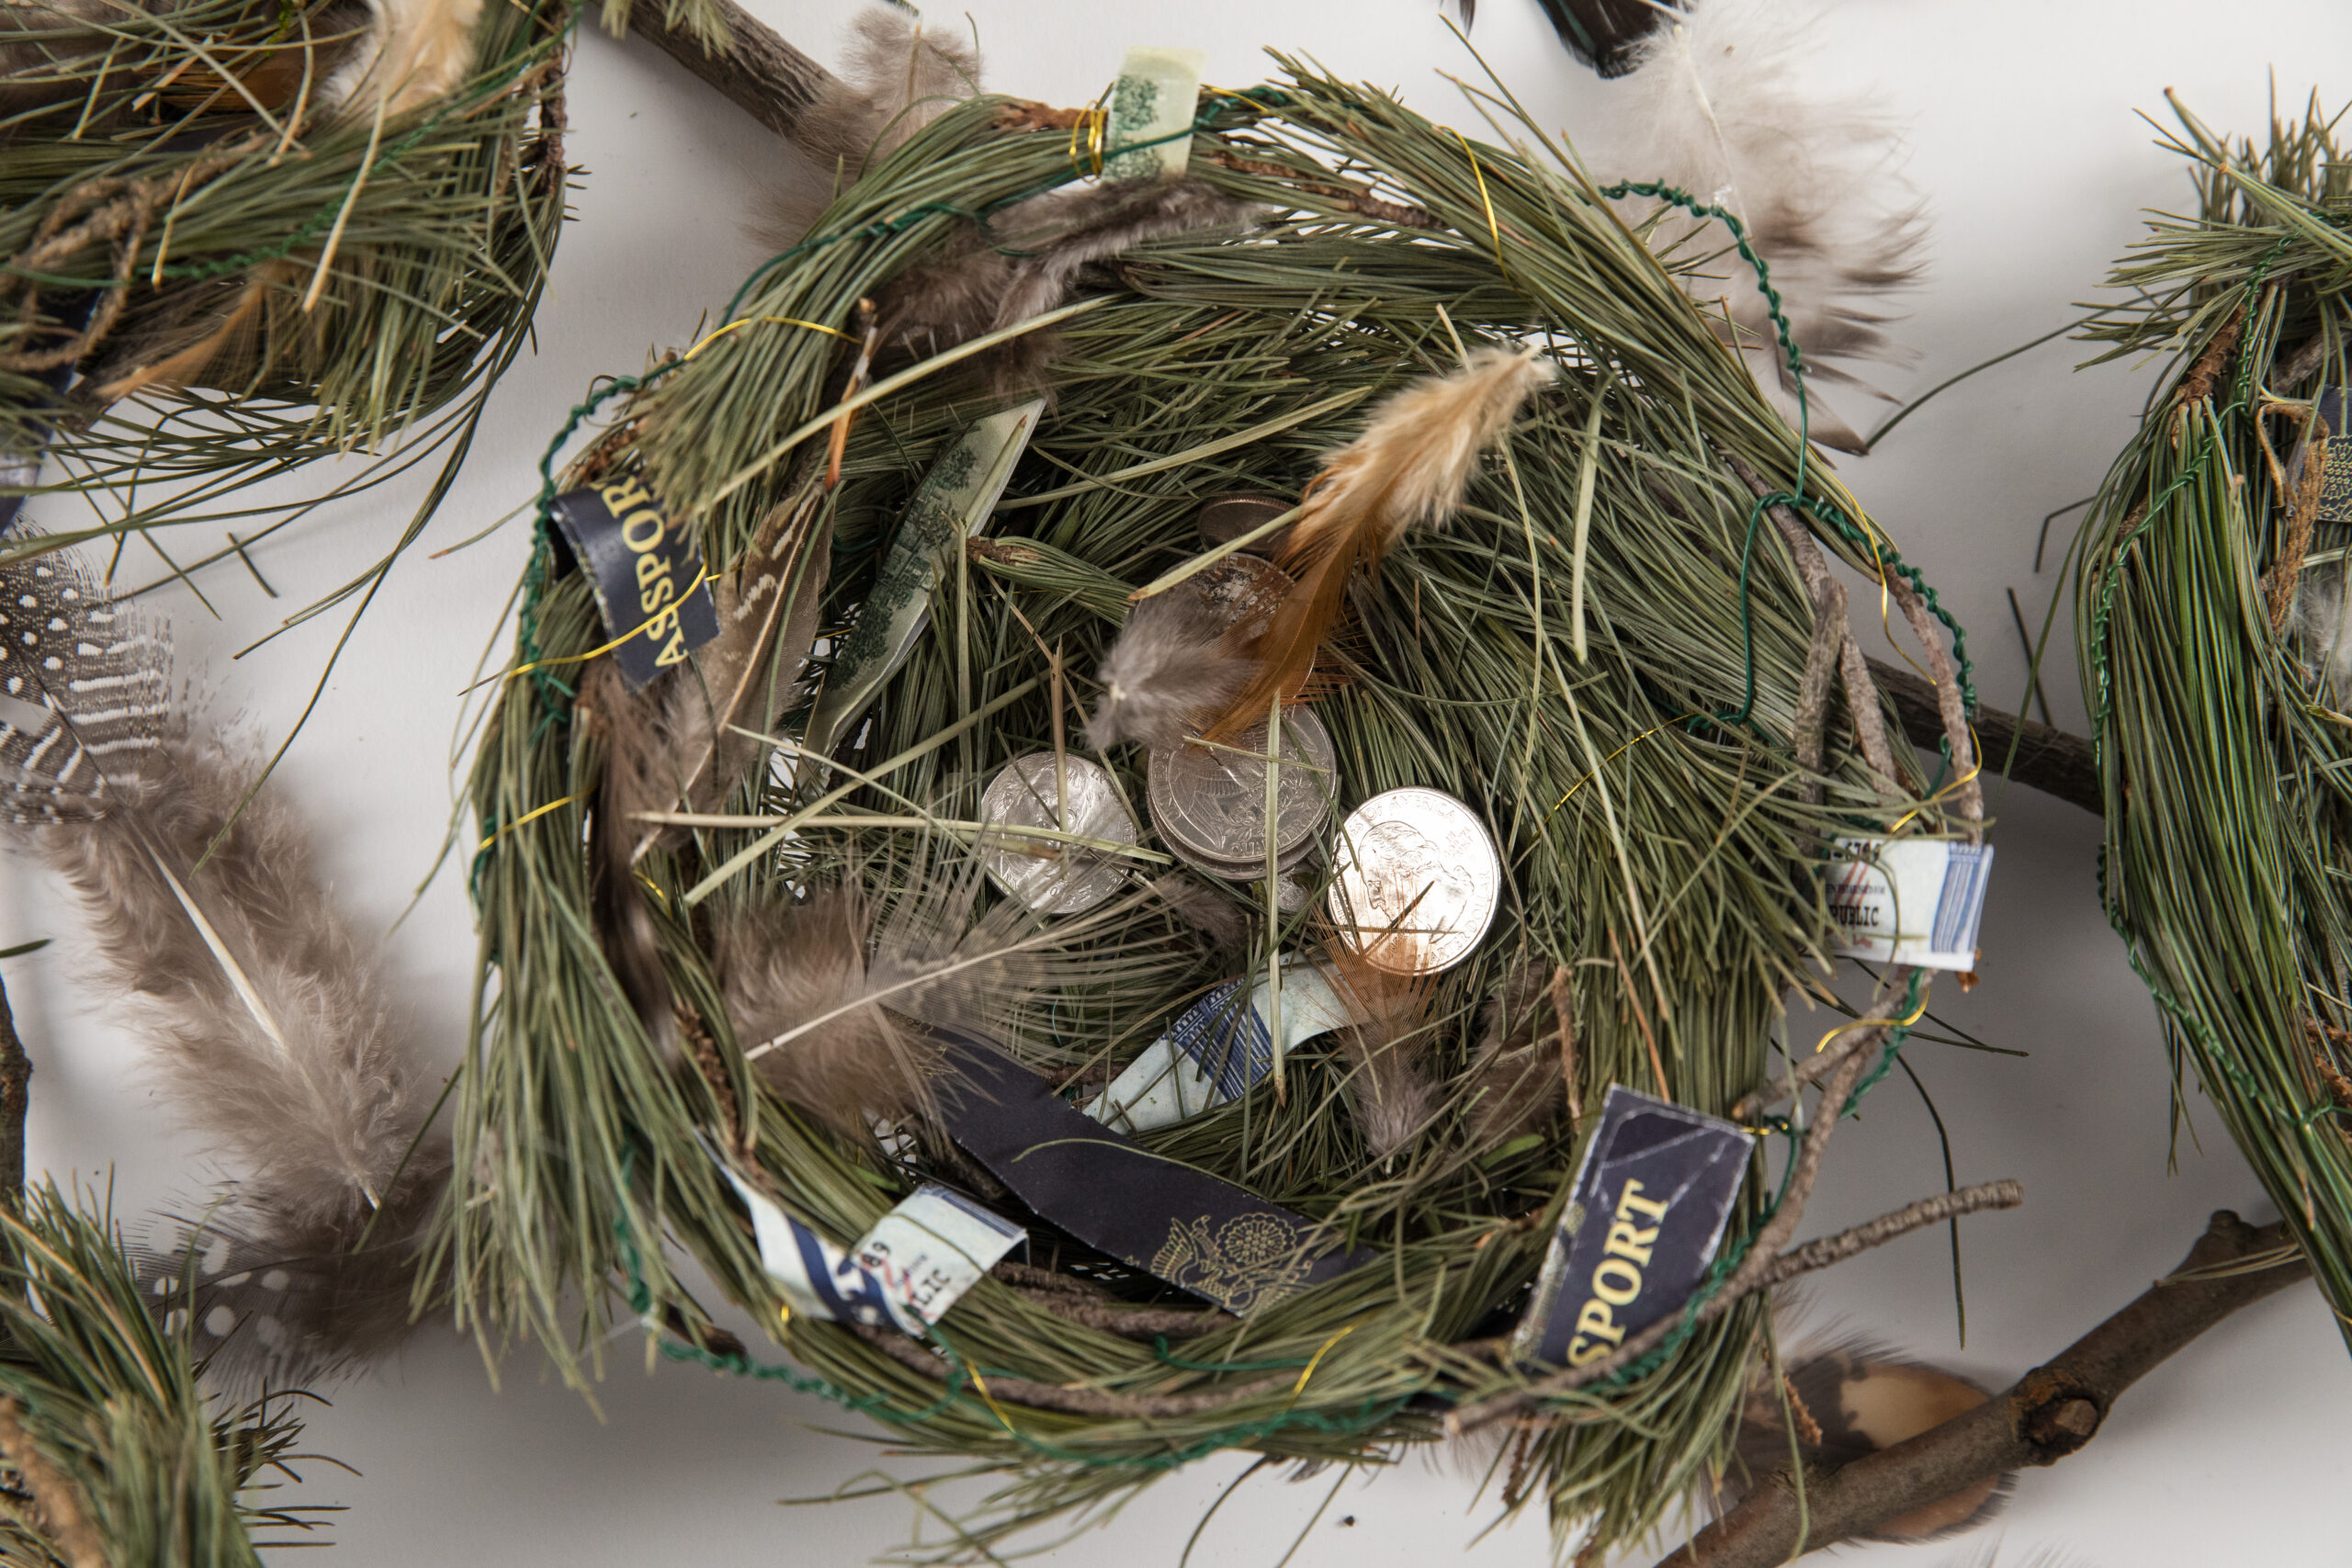 Nest made of pine needles. Quarters, dimes and nickels strewn within it. Some branches and feathers are visible outside of it.